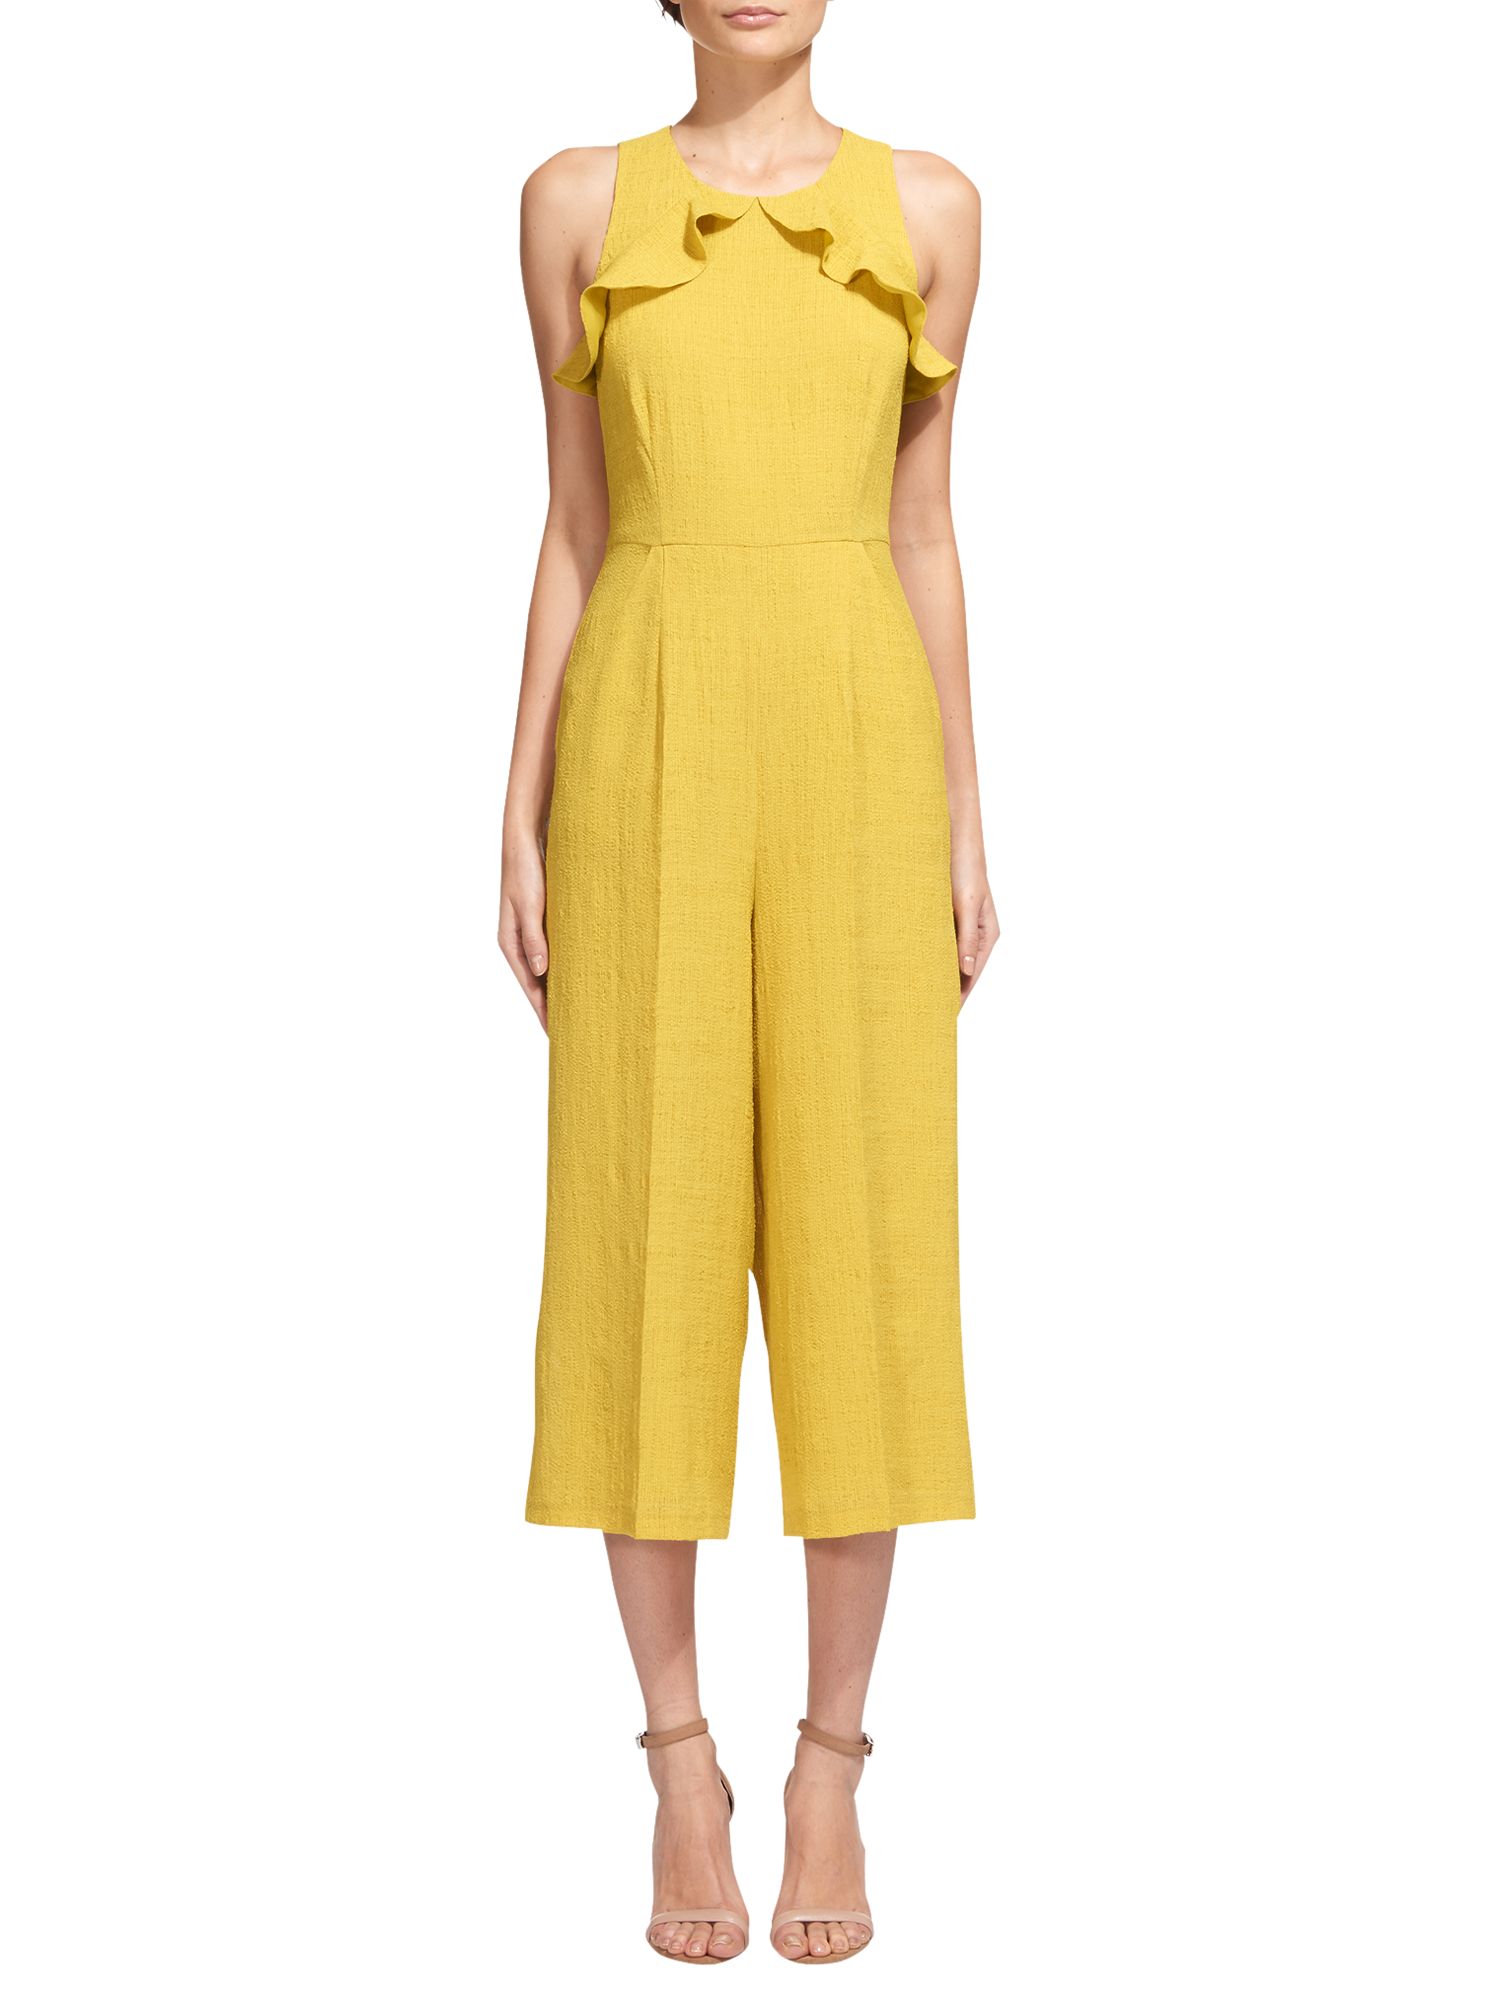 Whistles Mae Frill Detail Jumpsuit, Yellow, 6